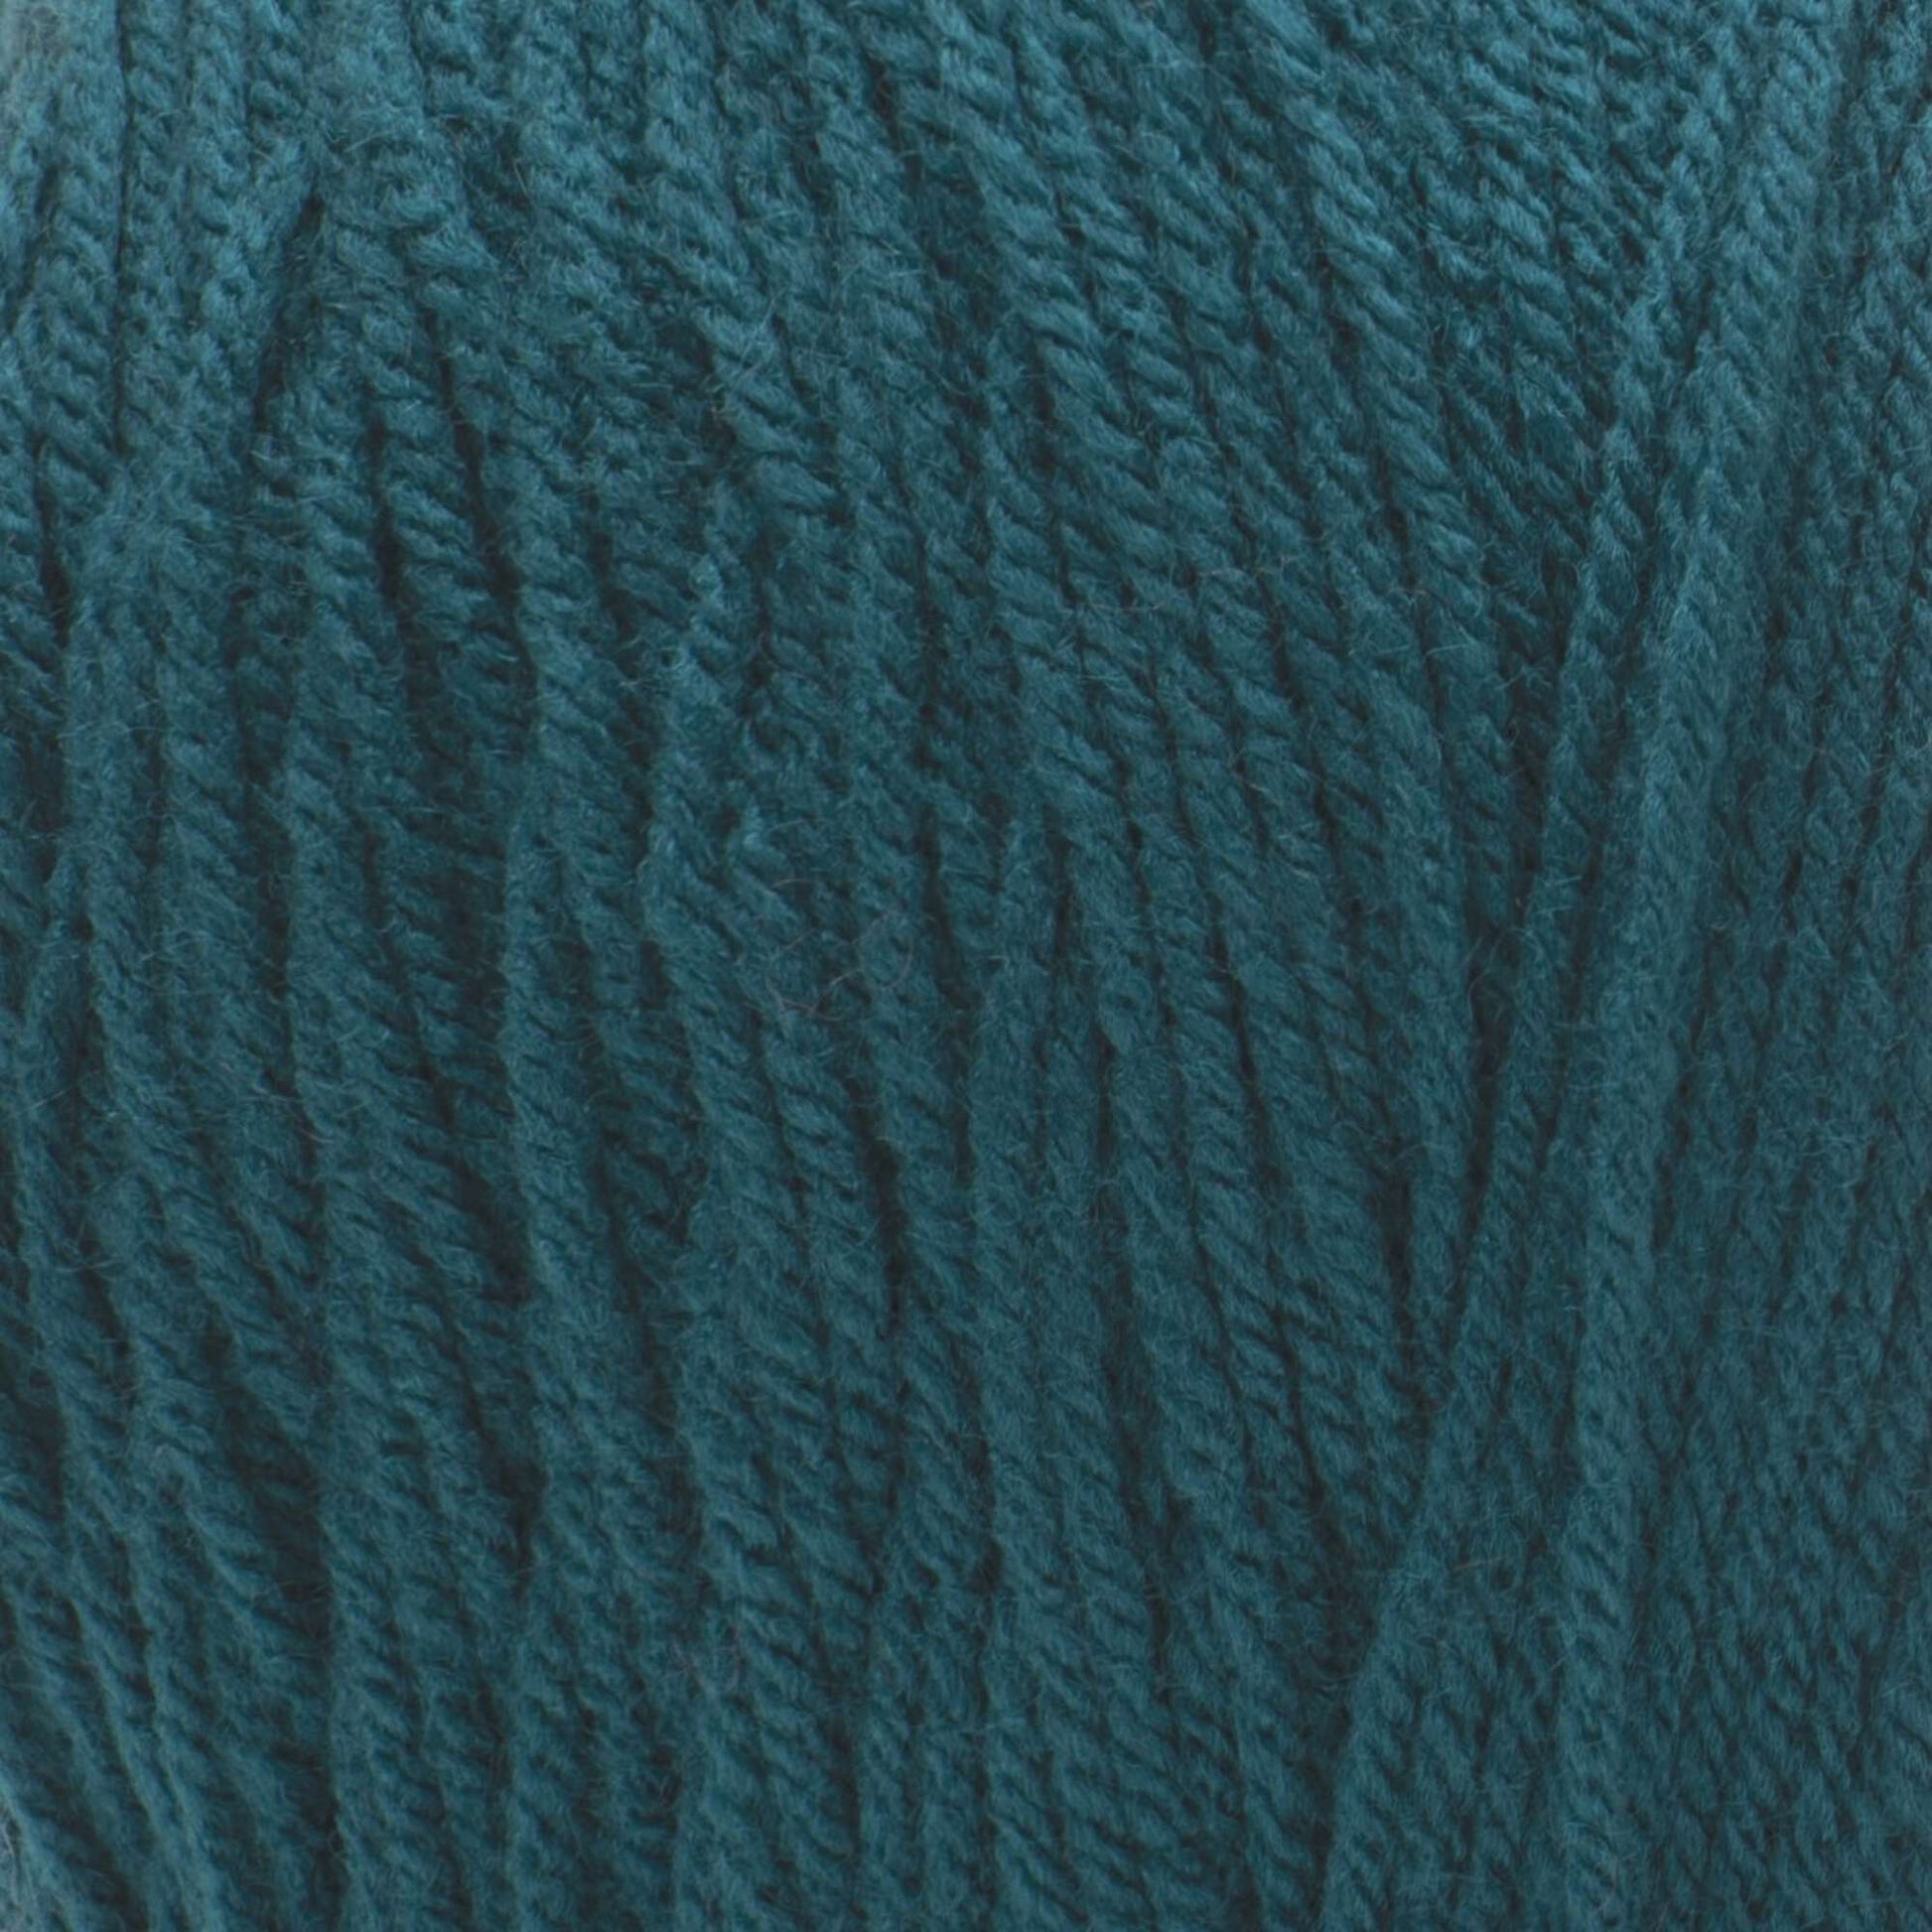 Help me ID this yarn please! It is a skein of Caron One Pound. Originally  purchased ~April 2020 but lost the label. Not soft sage, pale green, sky  blue, or azure. Looks